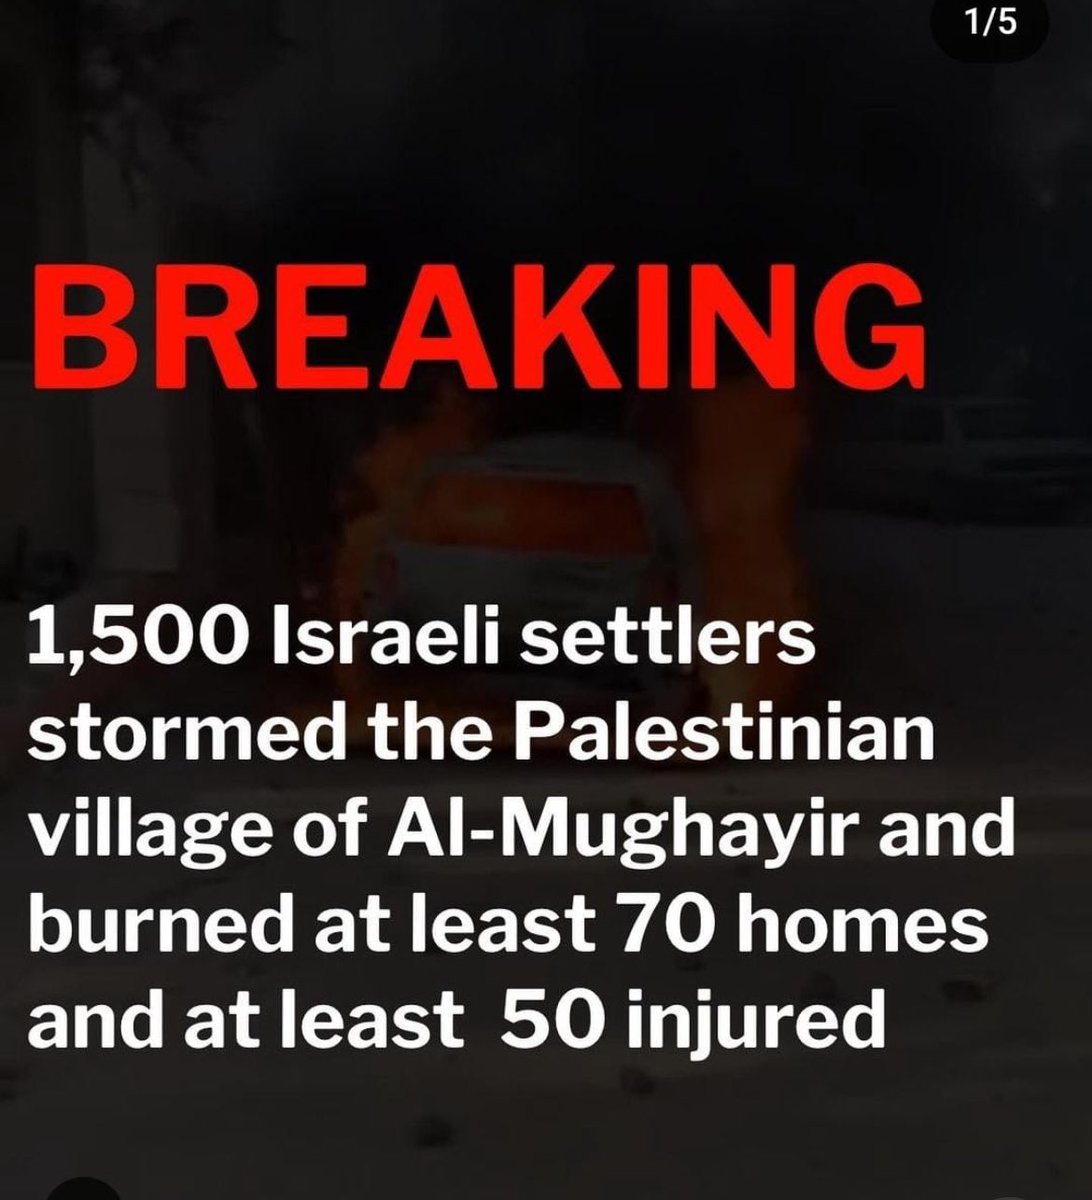 We live in an upside down world. As @GhassanAbuSitt1 is prevented from entering Germany to attend a peaceful conference, 1500 illegal settlers enter the Palestinian village of Al-Mughayr in the Occupied West Bank, burning homes.